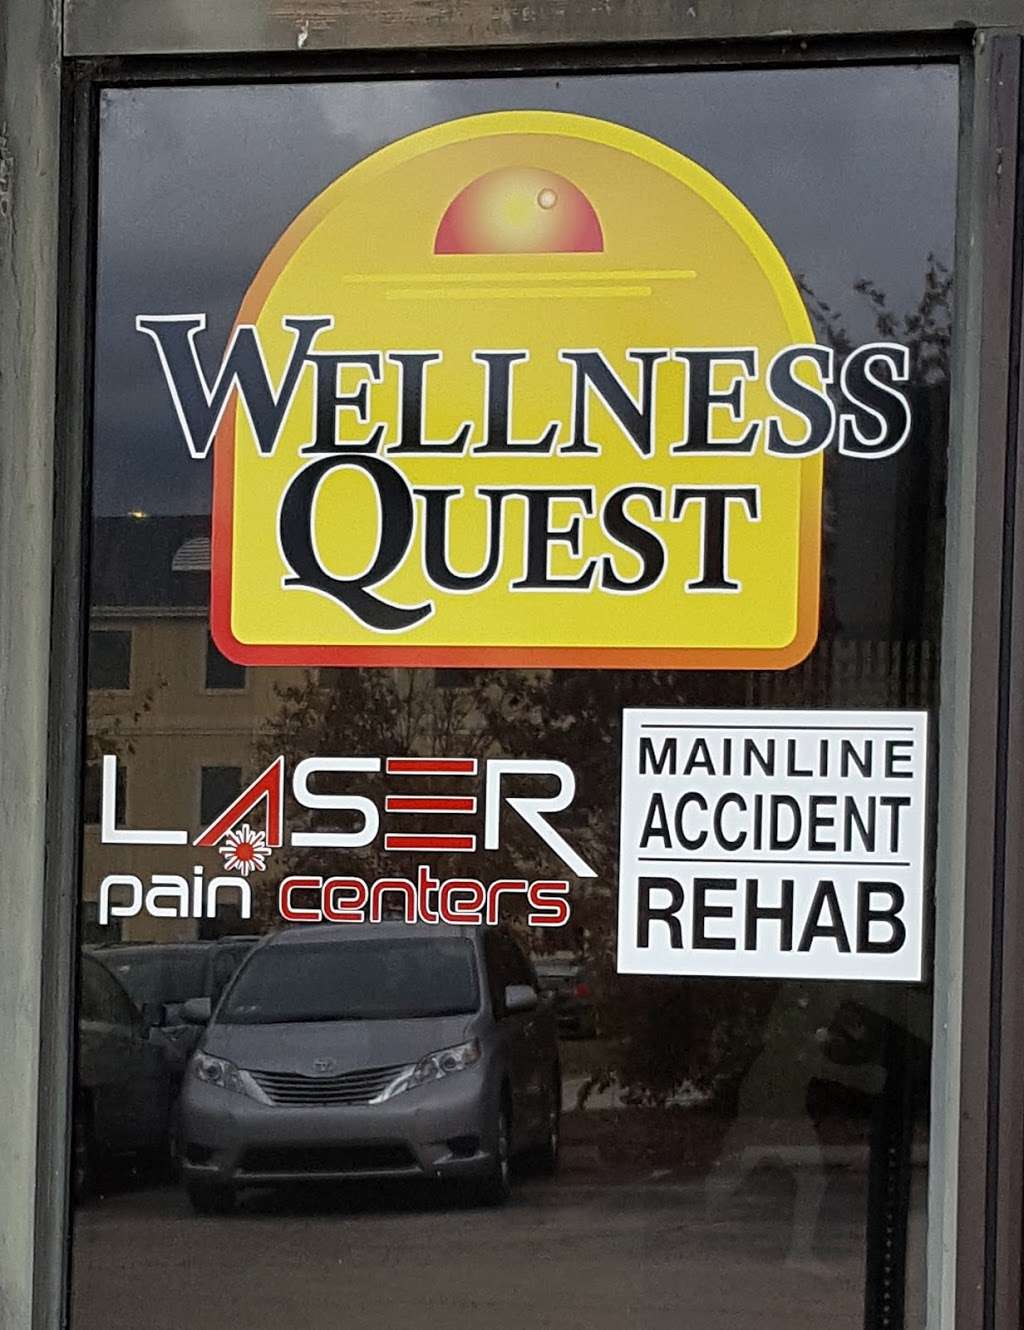 Laser Pain Centers | 970 Pulaski Dr, King of Prussia, PA 19406 | Phone: (610) 640-9355